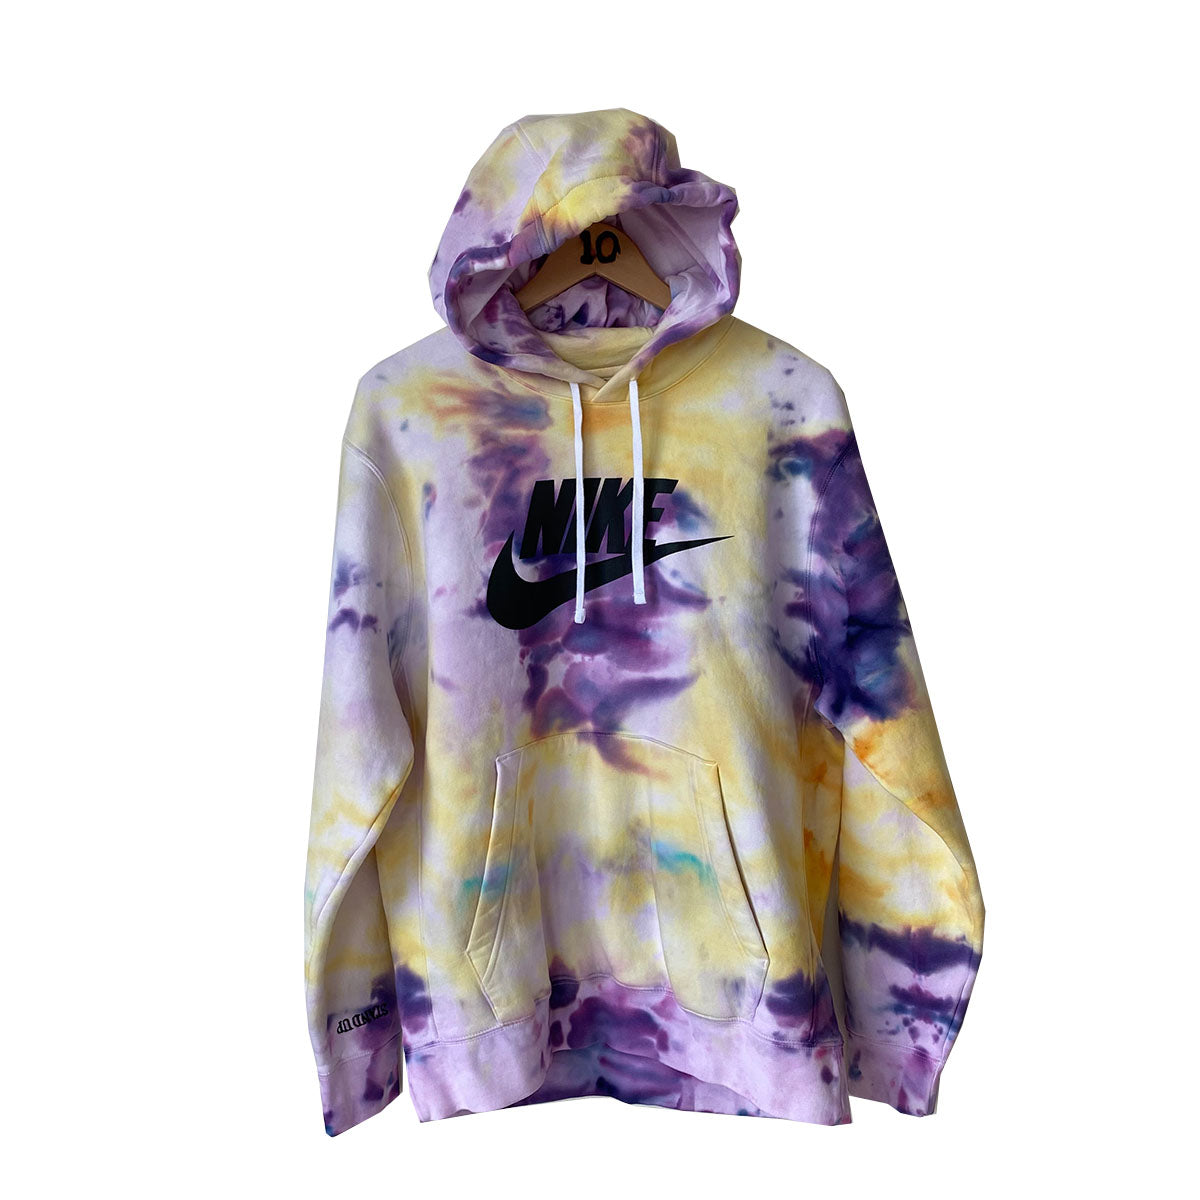 HAND DYED TIE DYE HOODIE  SUNSET 🌅 – The 10 Influence